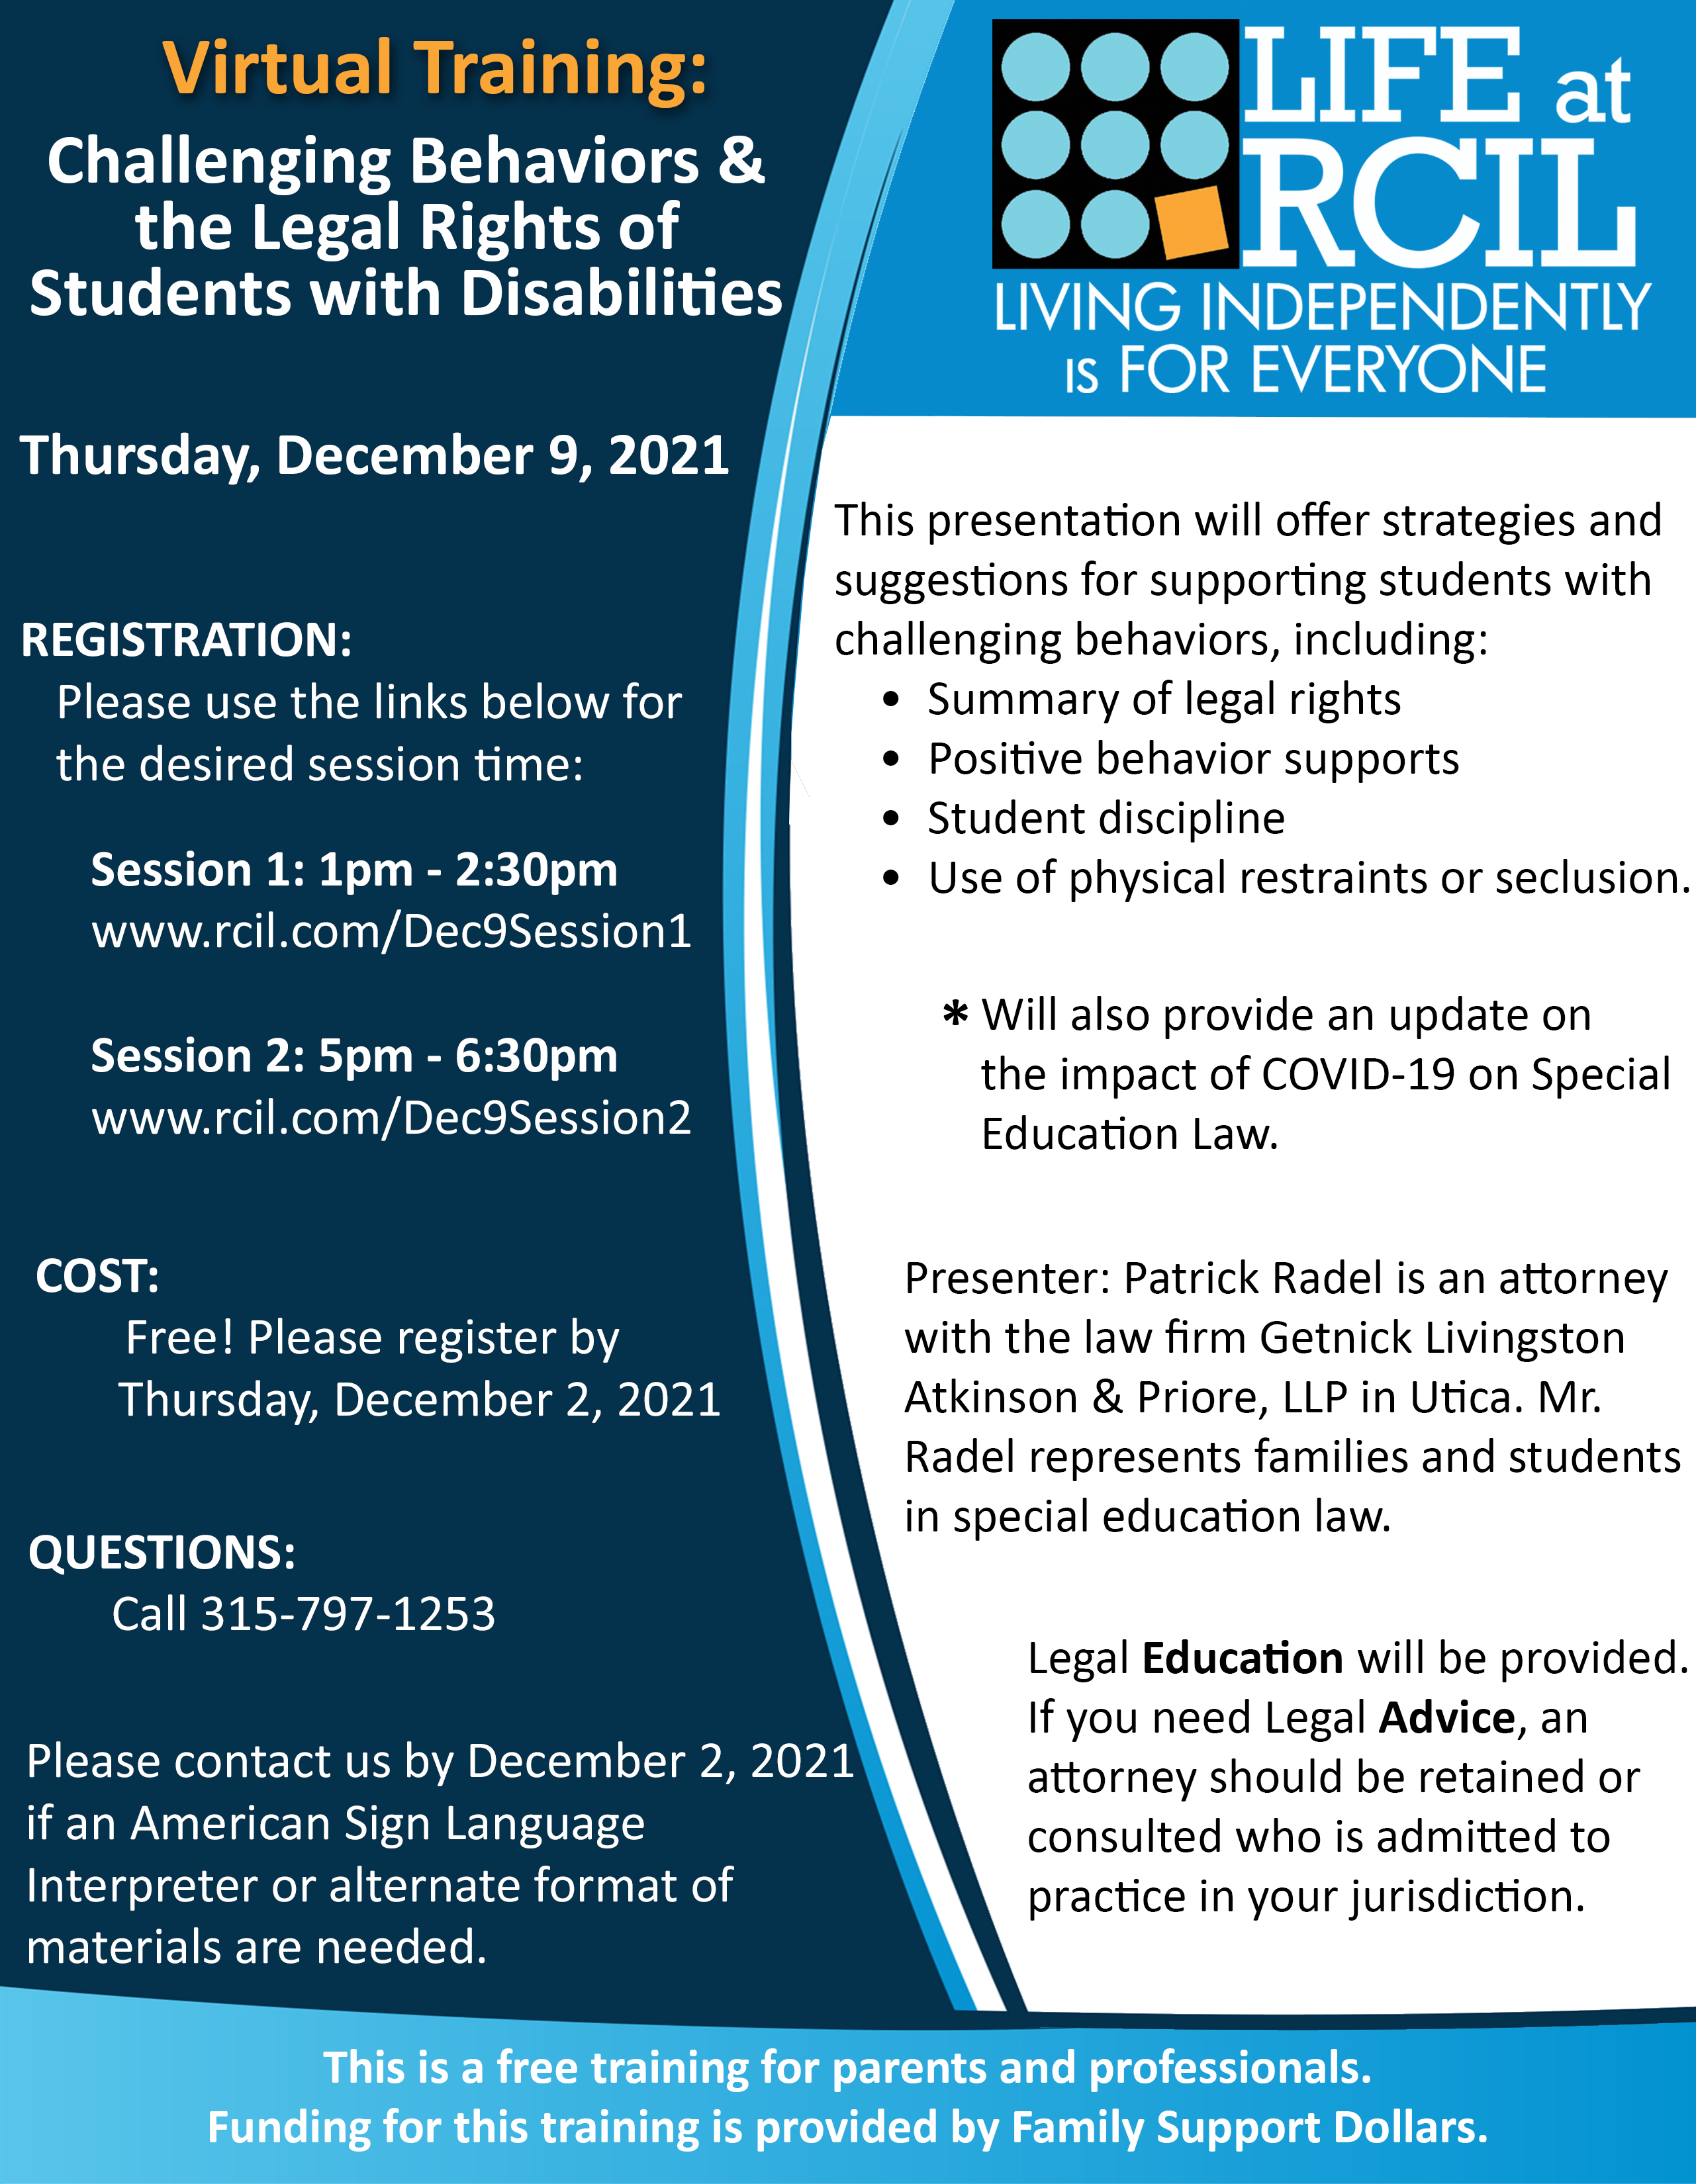 Flyer for Virtual Training - Challenging Behaviors & the Legal Rights of Students with Disabilities